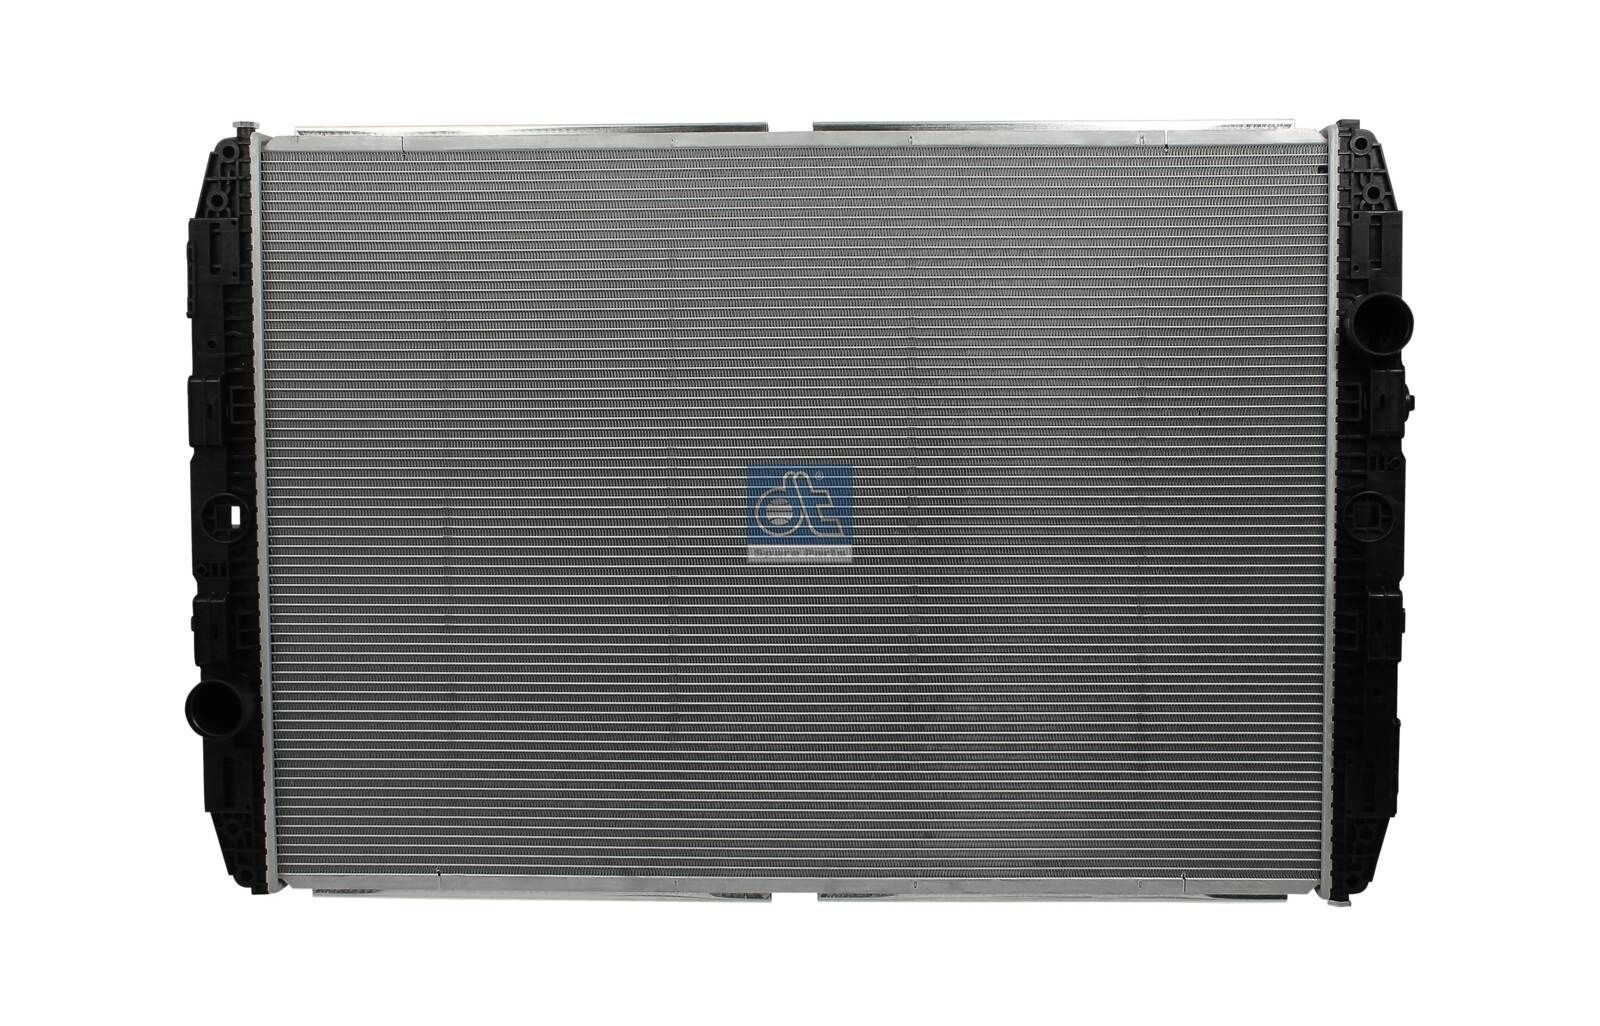 8MK 376 755-421 DT Spare Parts 1067 x 748 x 42 mm Radiator 3.16285 buy